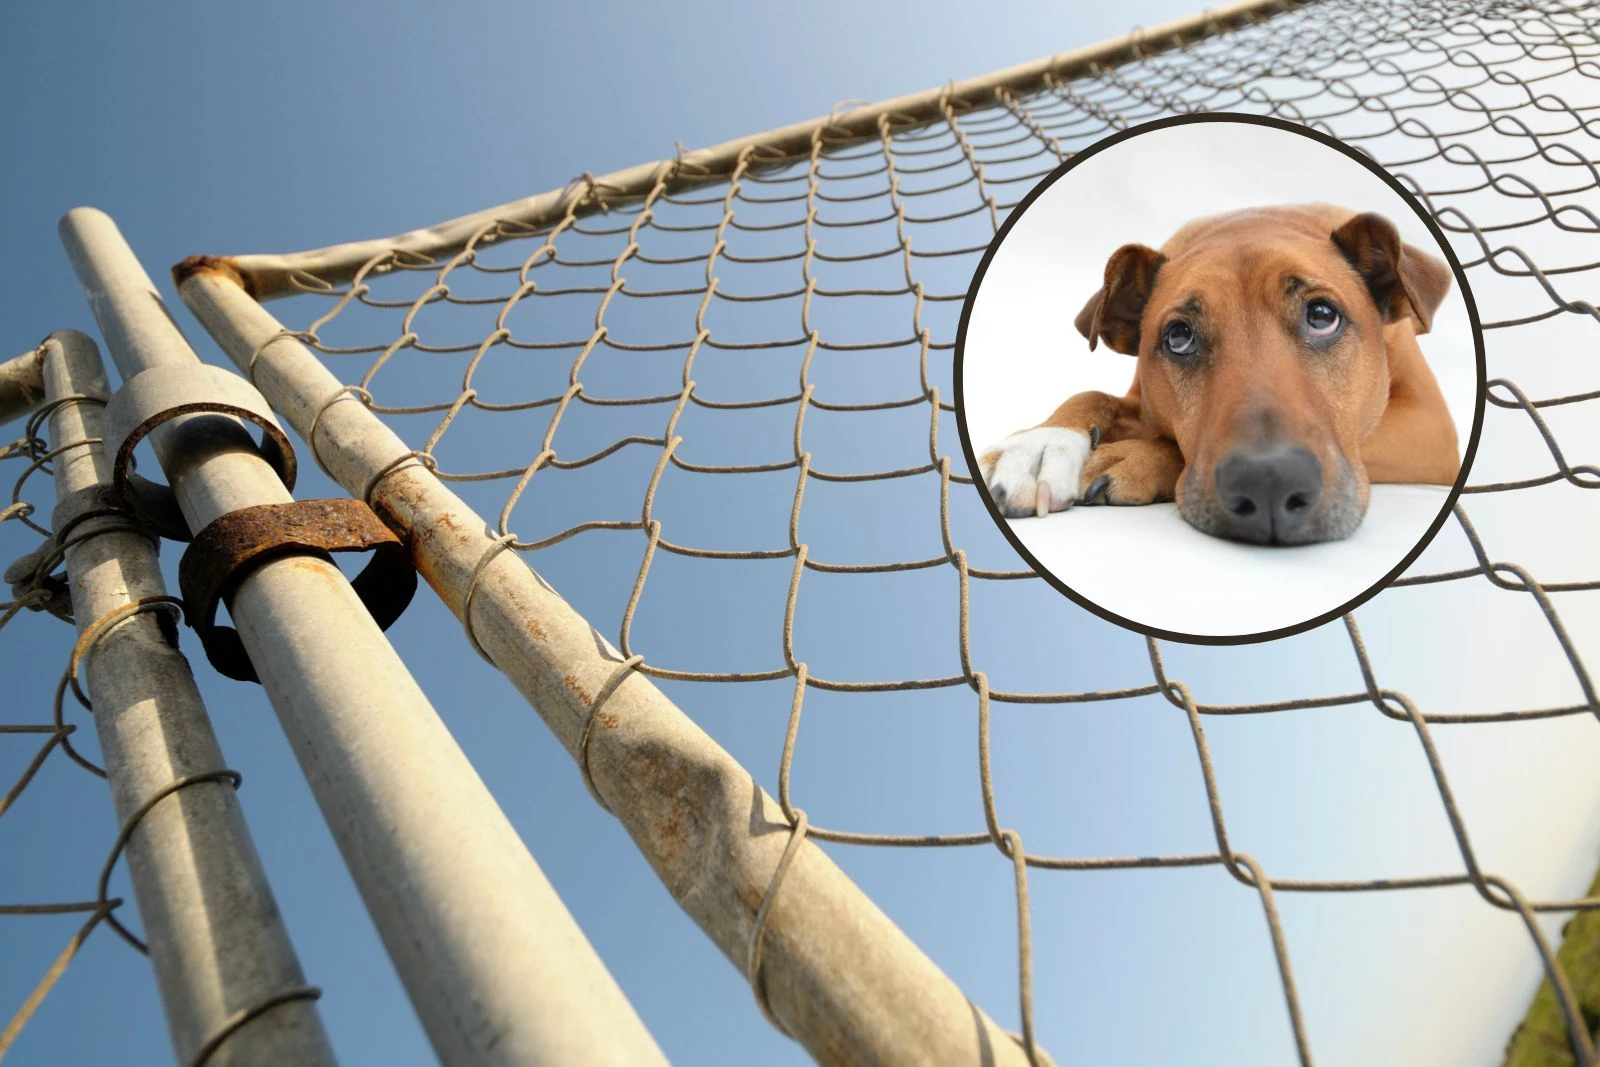 Cheap and Easy Way to Keep Dogs From Going Under Chain Link Fence